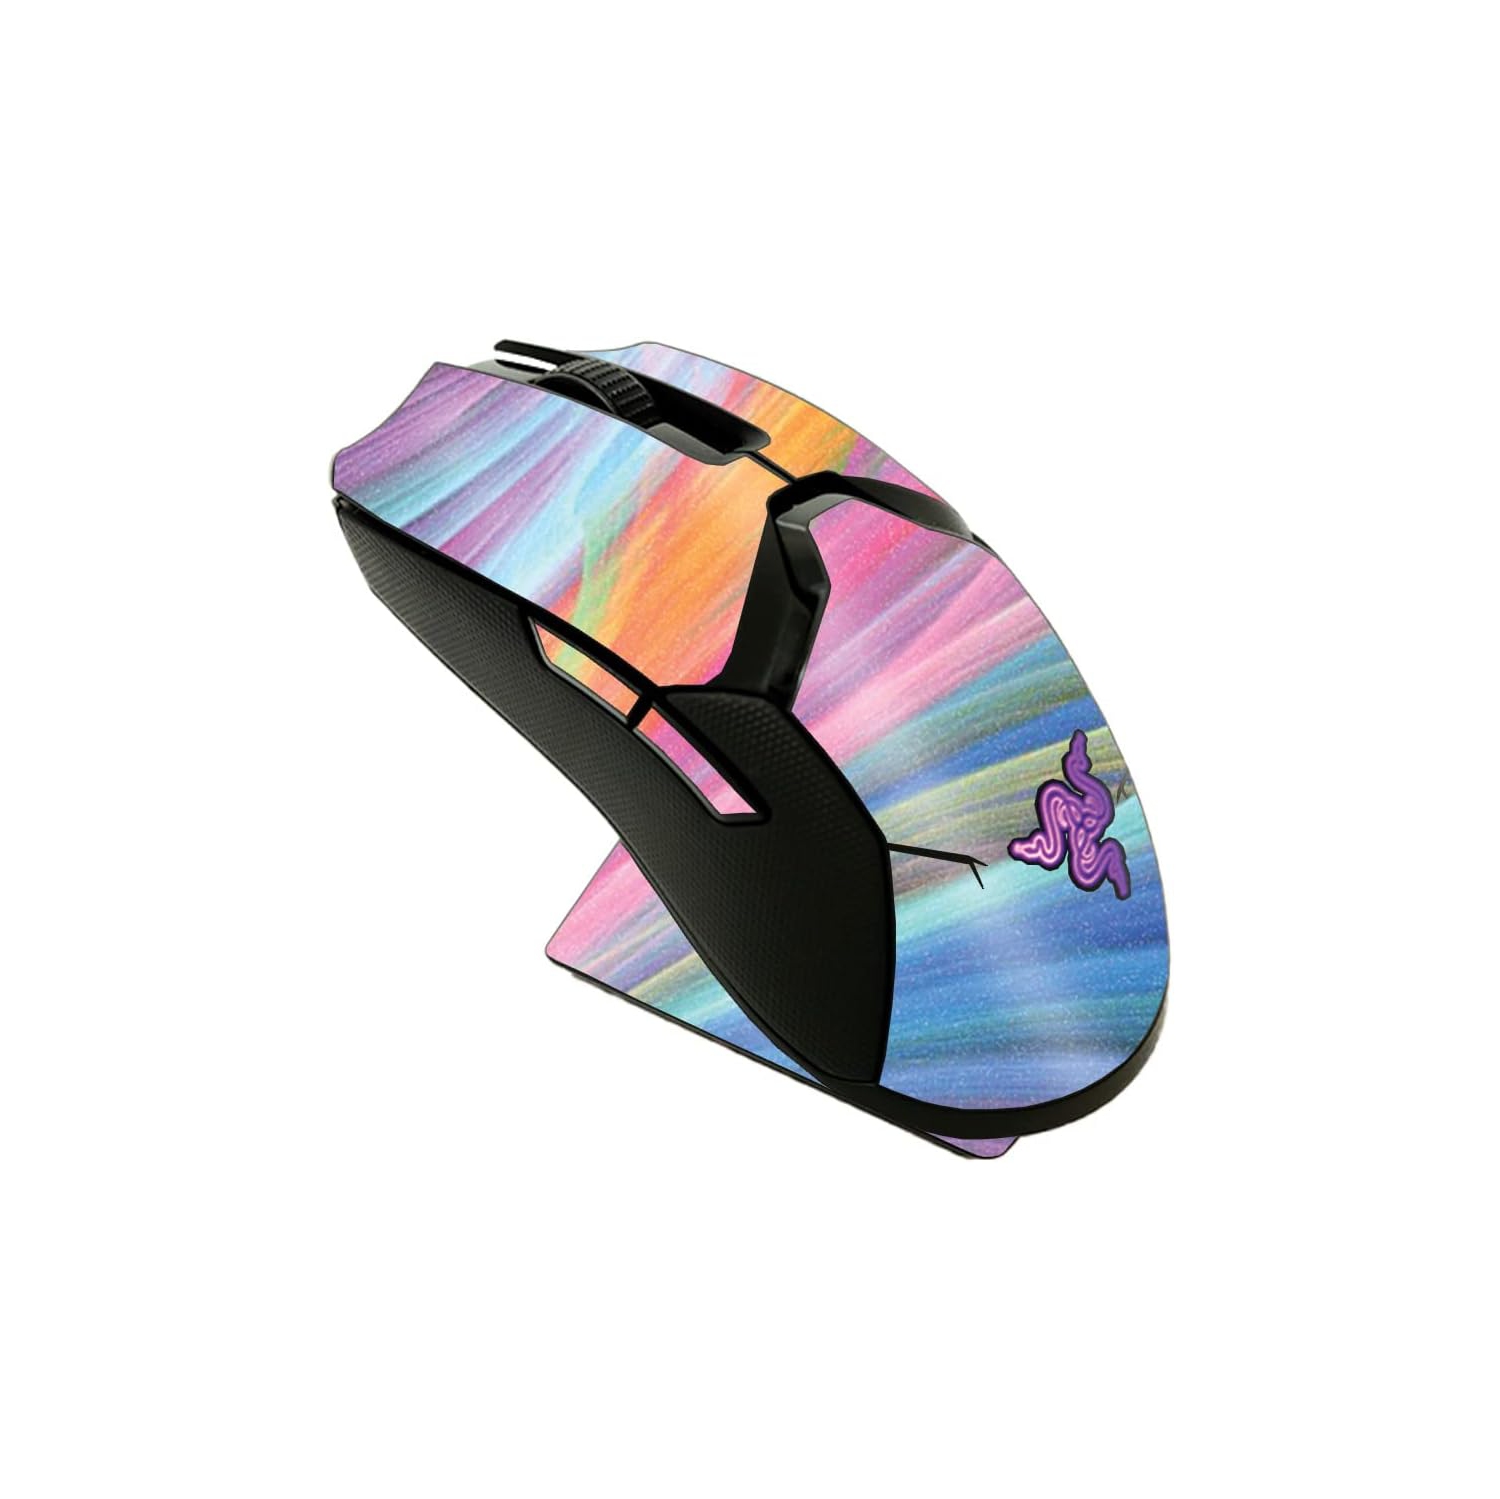 MightySkins Glossy Glitter Skin Compatible with Razer Viper Ultimate - Rainbow Waves | Protective, Durable High-Gloss